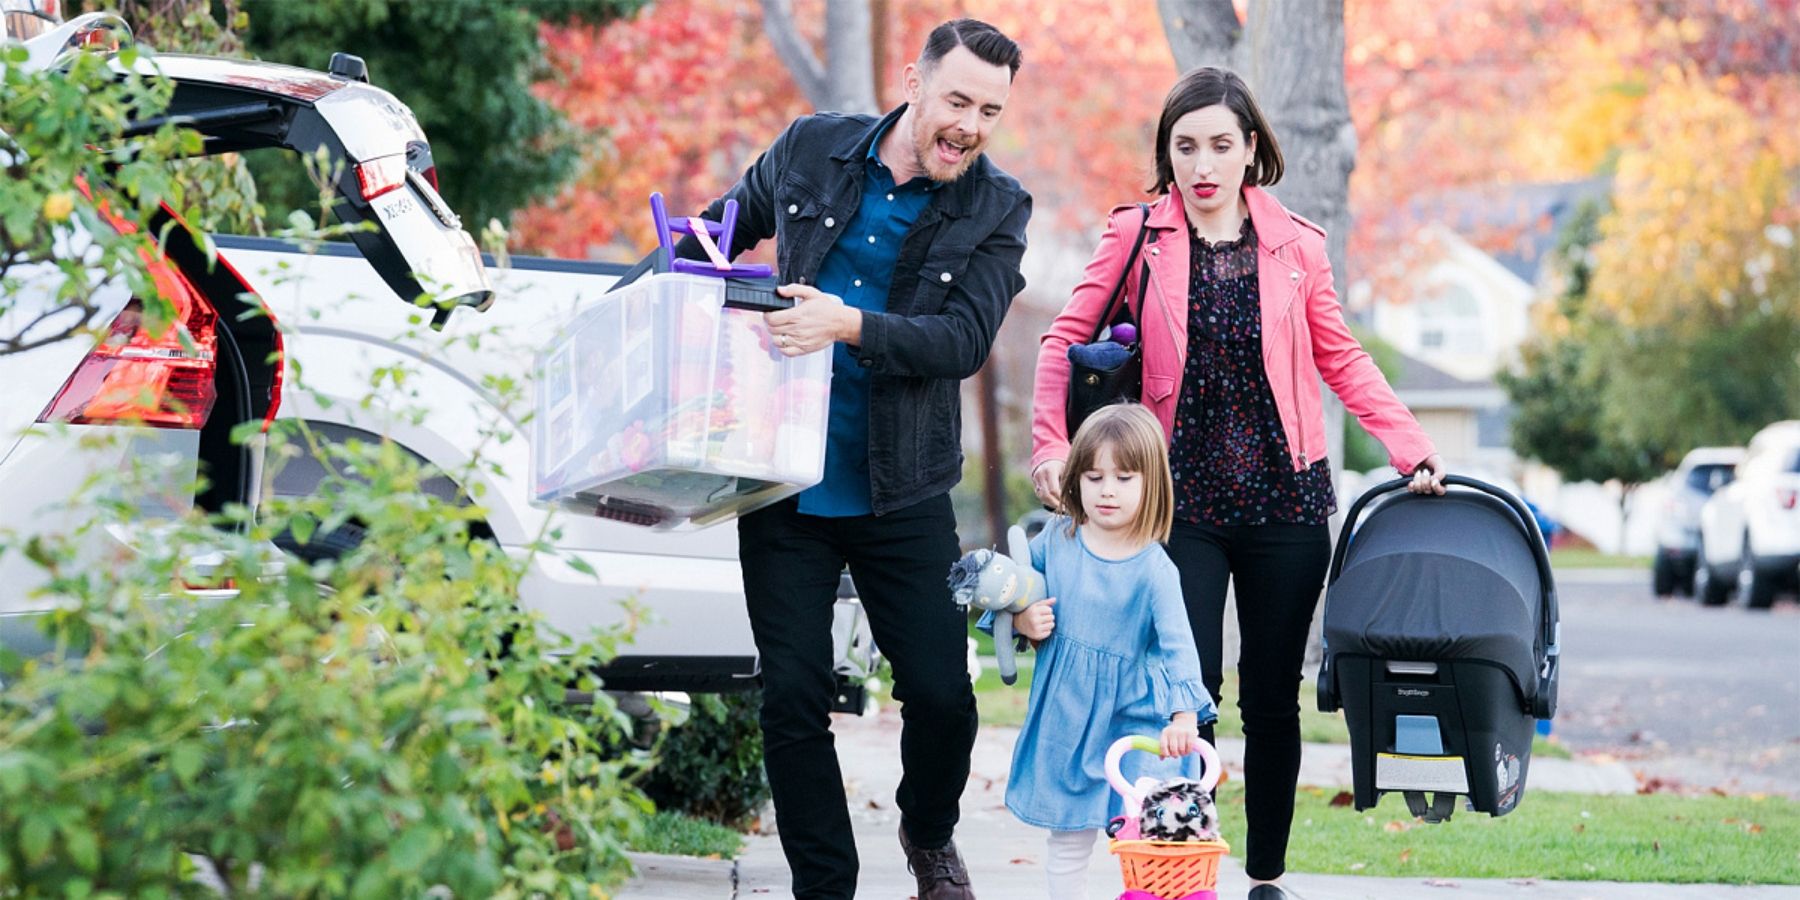 Greg (Colin Hanks) and Jennifer (Zoe Lister-Jones) with their daughter Lark (Ana Sophia Heger) in Life In Pieces